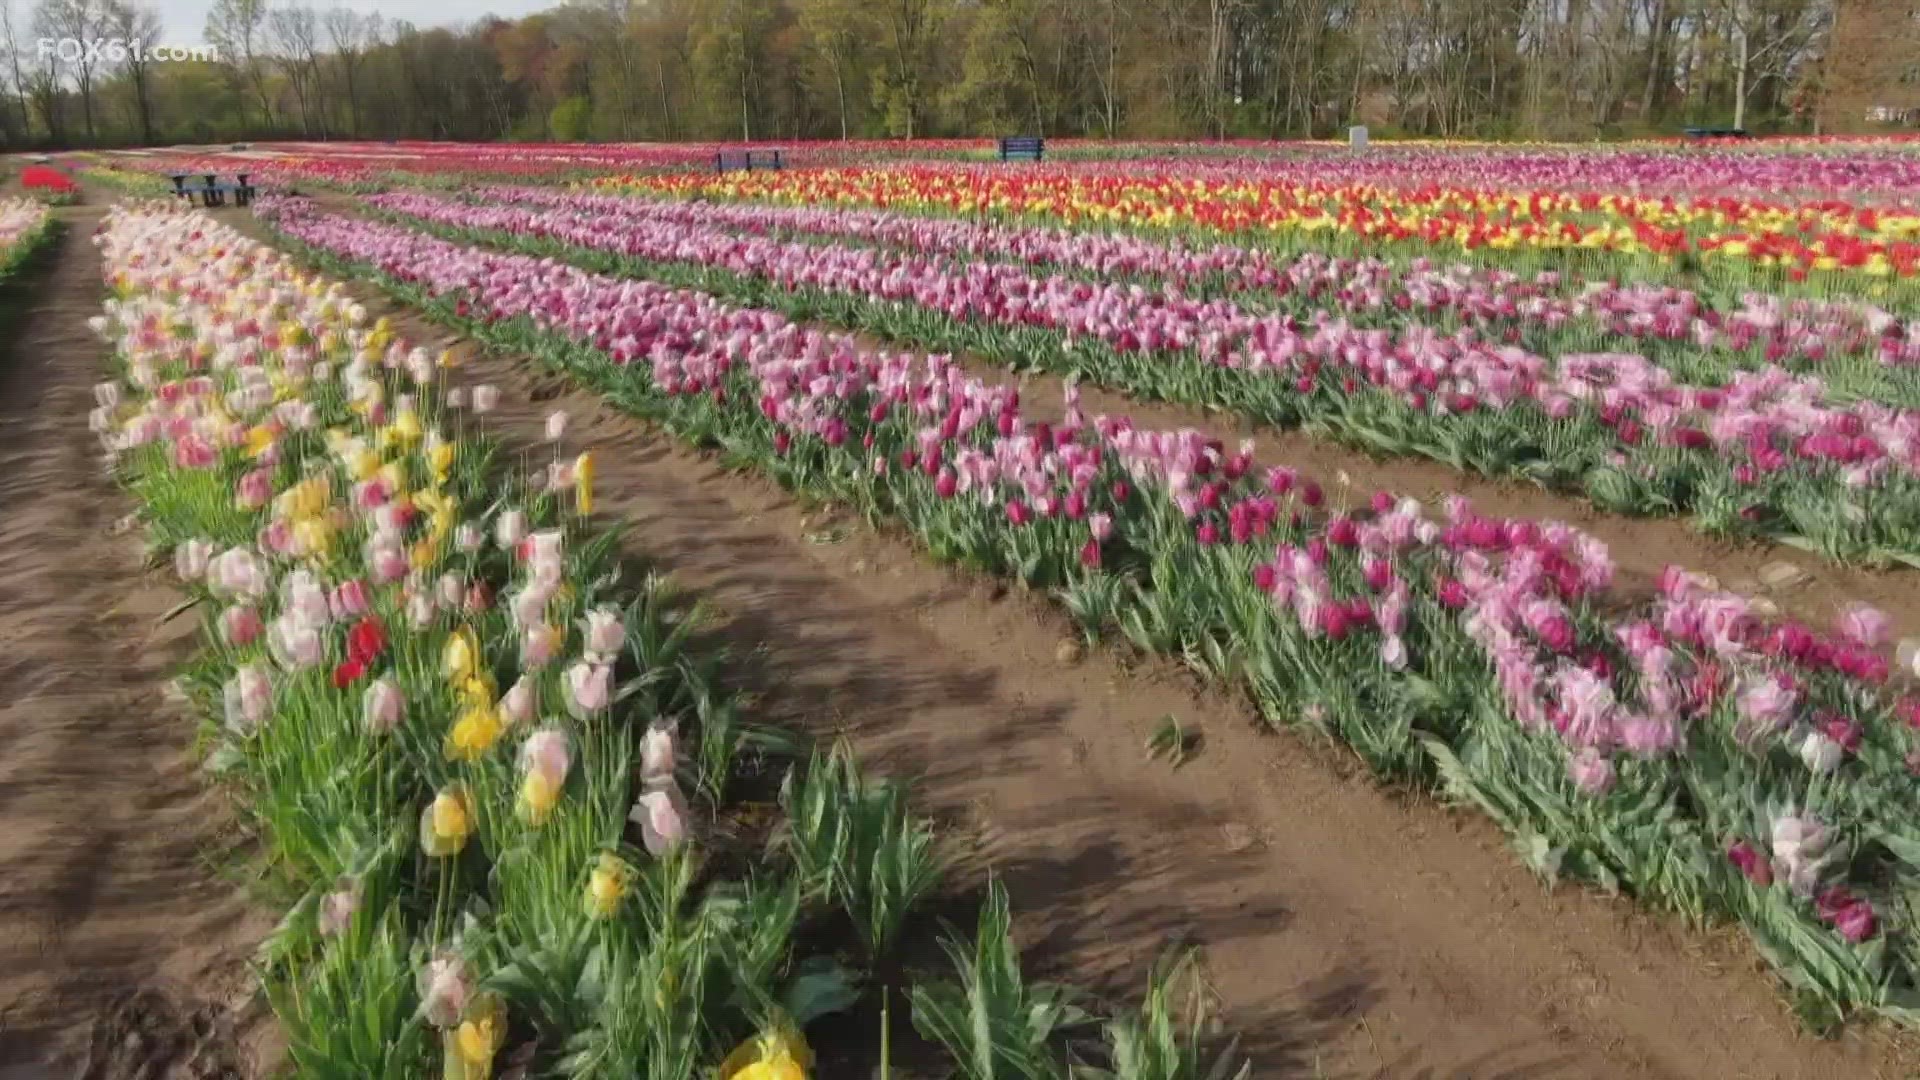 People can pick and purchase tulips for special holidays and for the community.